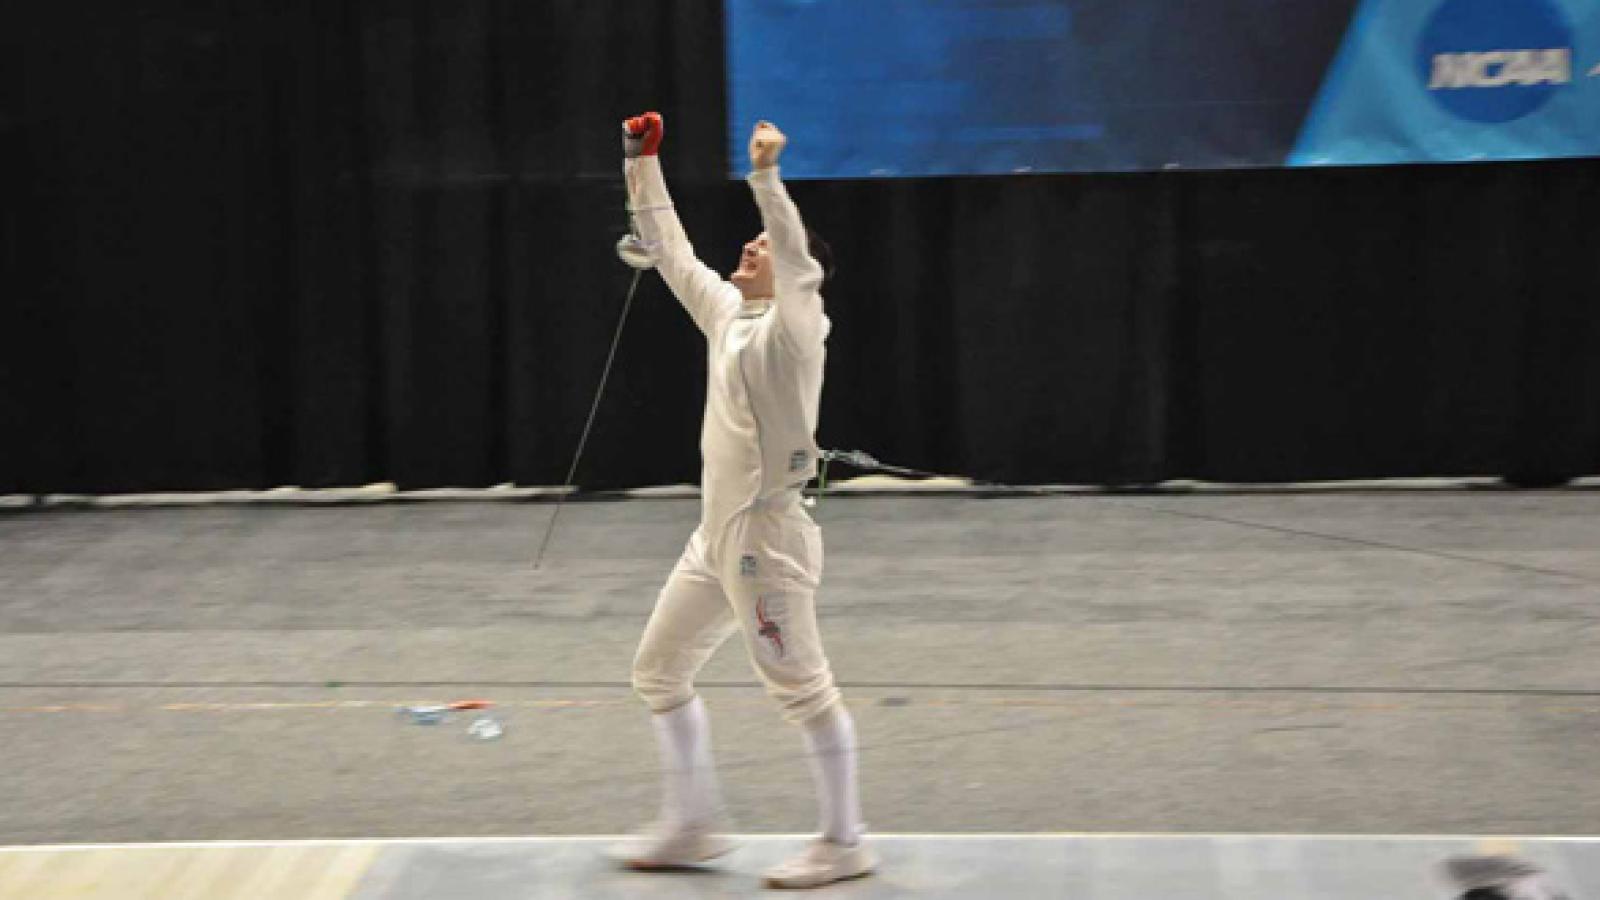 Marco Canevari wins first place in fencing tournament